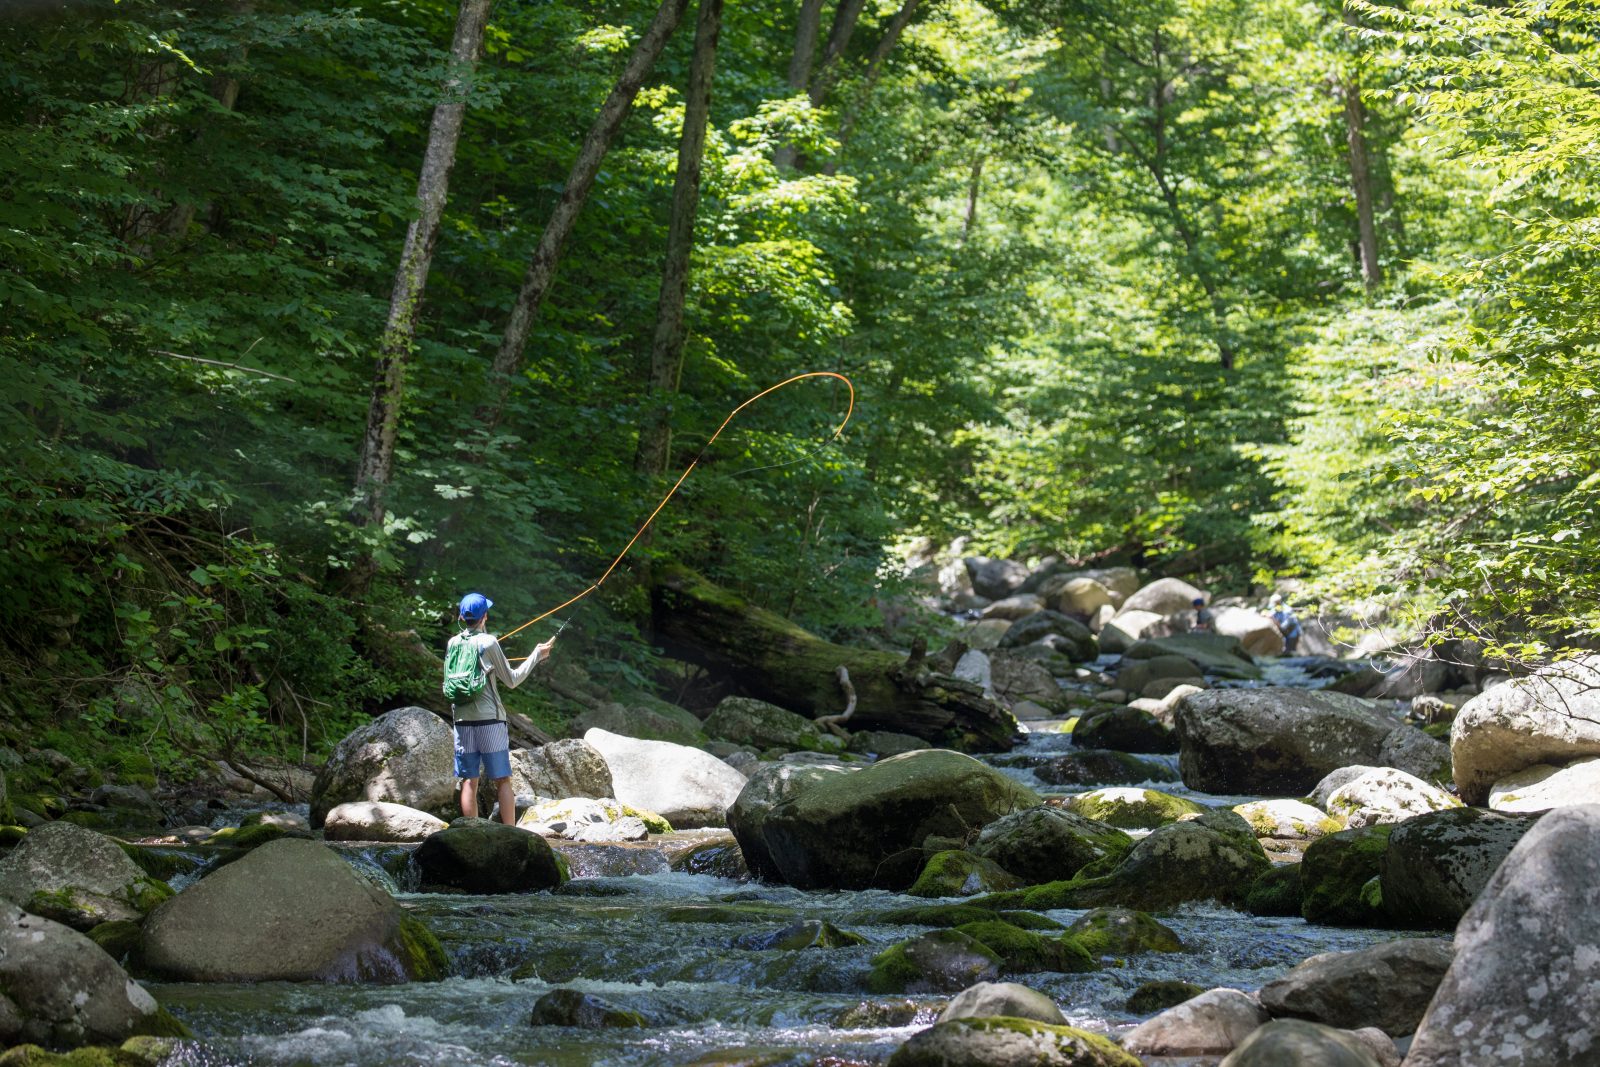 An angler flyfishing in a river